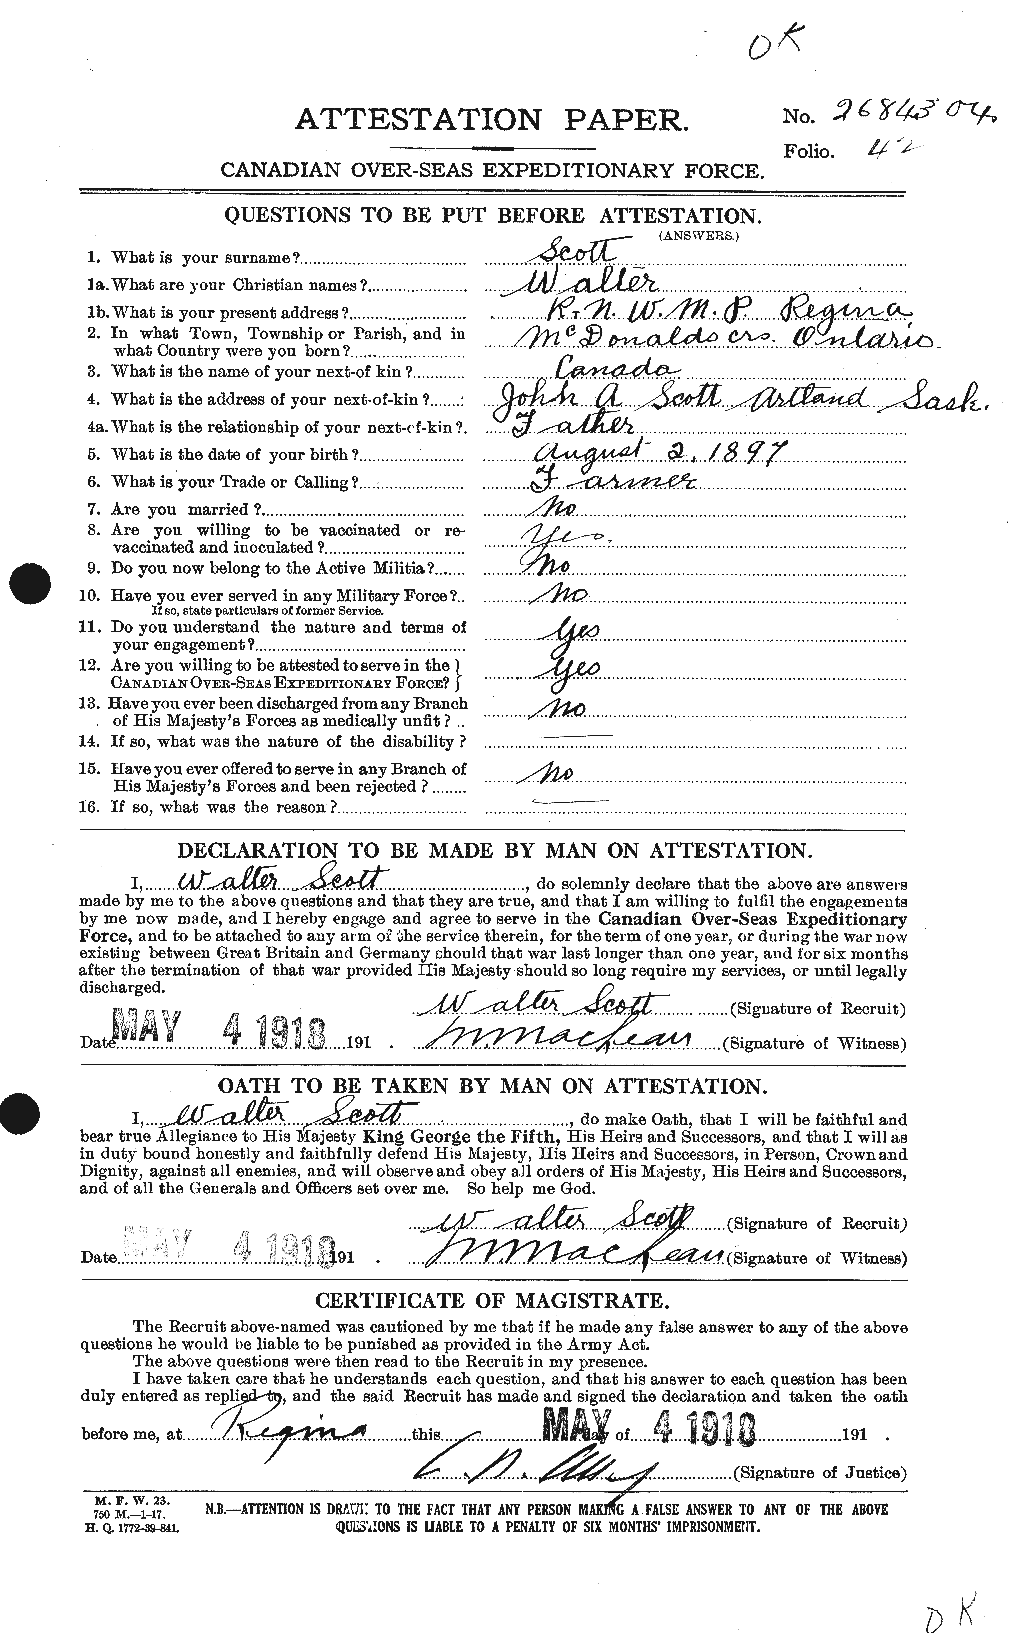 Personnel Records of the First World War - CEF 088014a